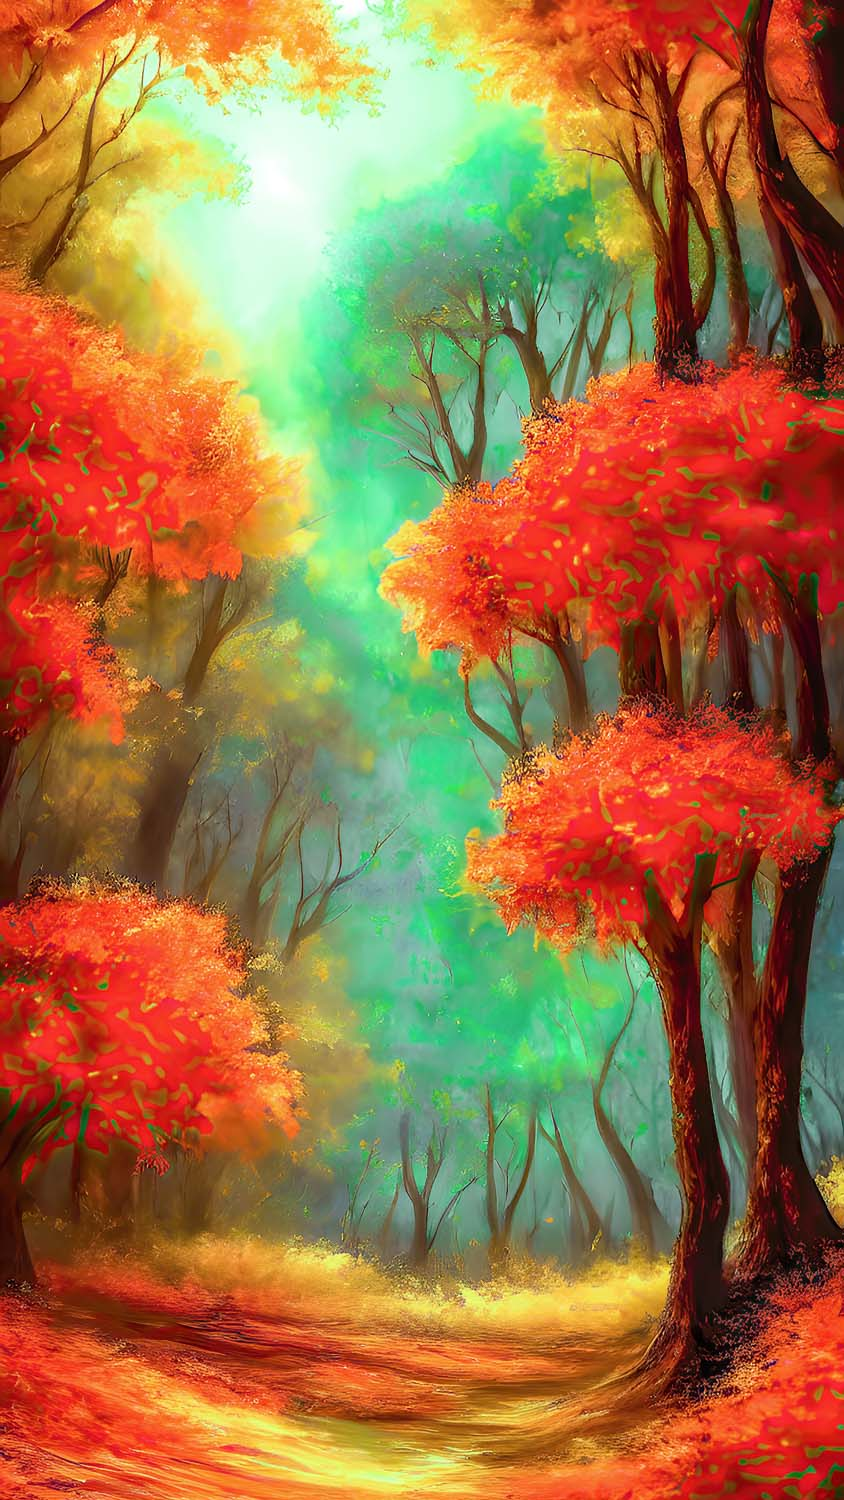 Autumn Forest Art Painting IPhone Wallpaper HD  IPhone Wallpapers